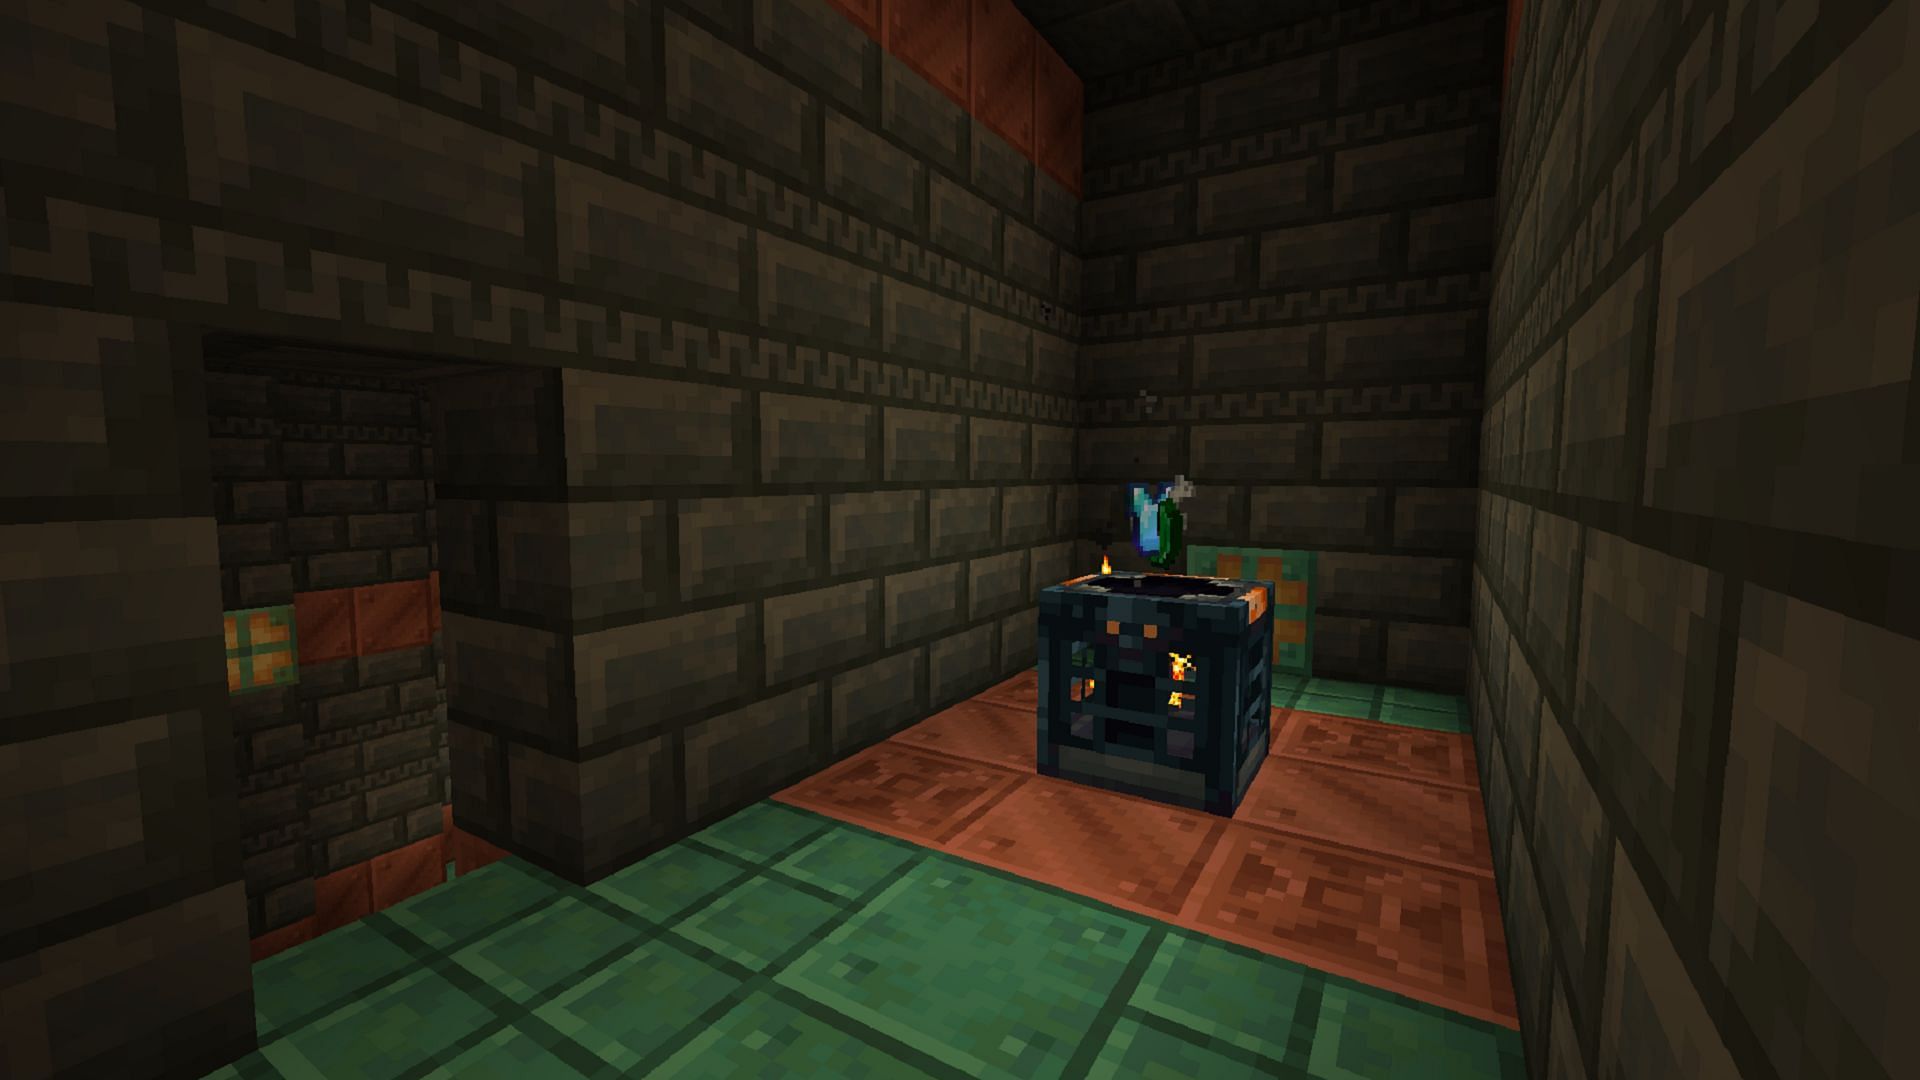 Trial keys can be used to open vaults in the 1.21 update (Image via Mojang)